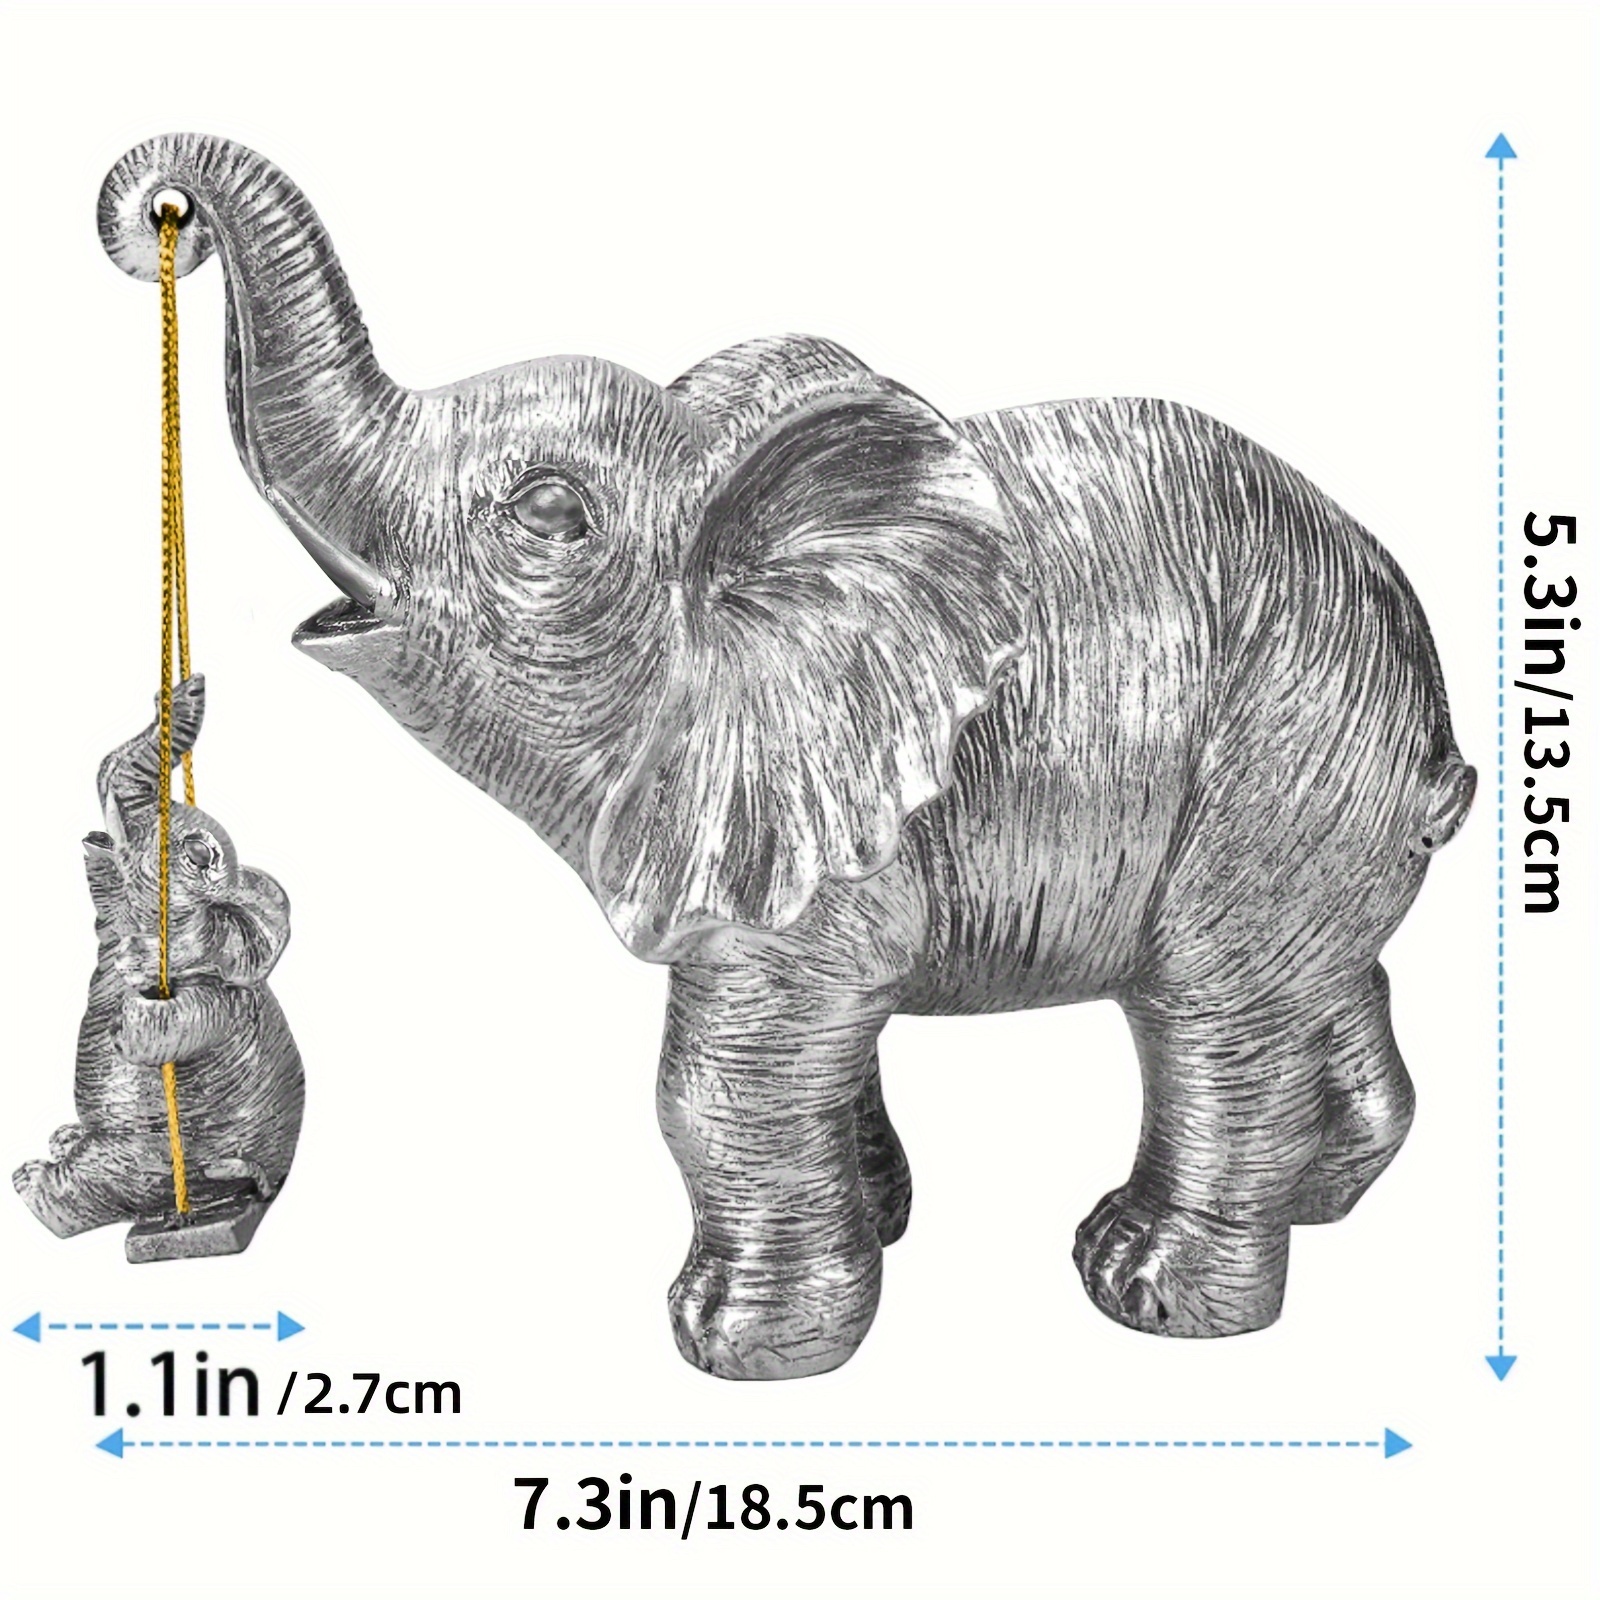 Elephant Statue. Gold Elephant Decor Brings Good Luck, Health, Strength.  Elephant Gifts for Women, Mom Gifts. Decorations Applicable Home, Office